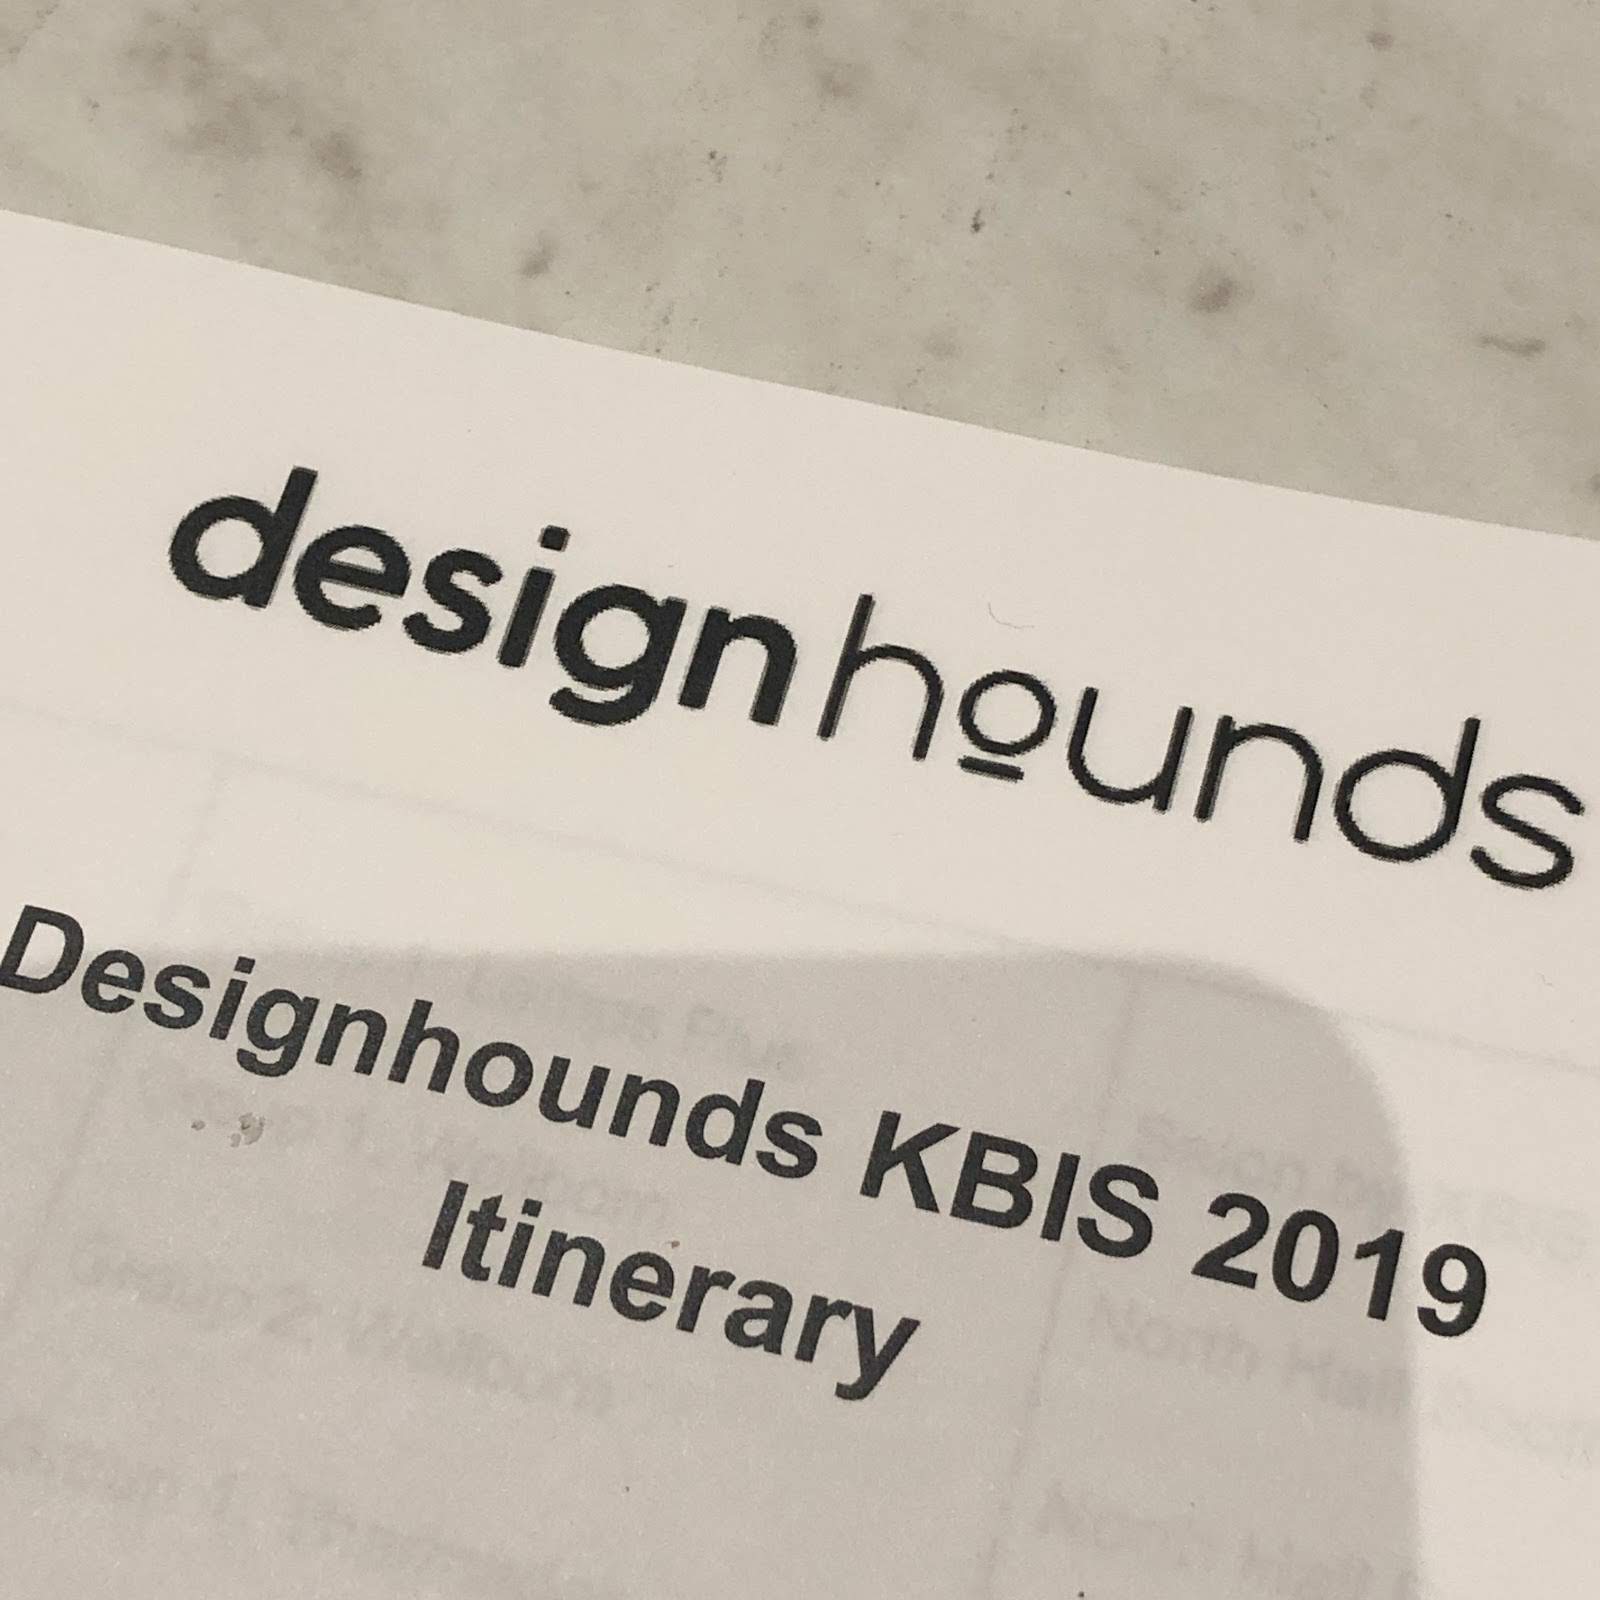 Design Hounds - KBIS 2019 - Itinerary - Details Full Service Interiors